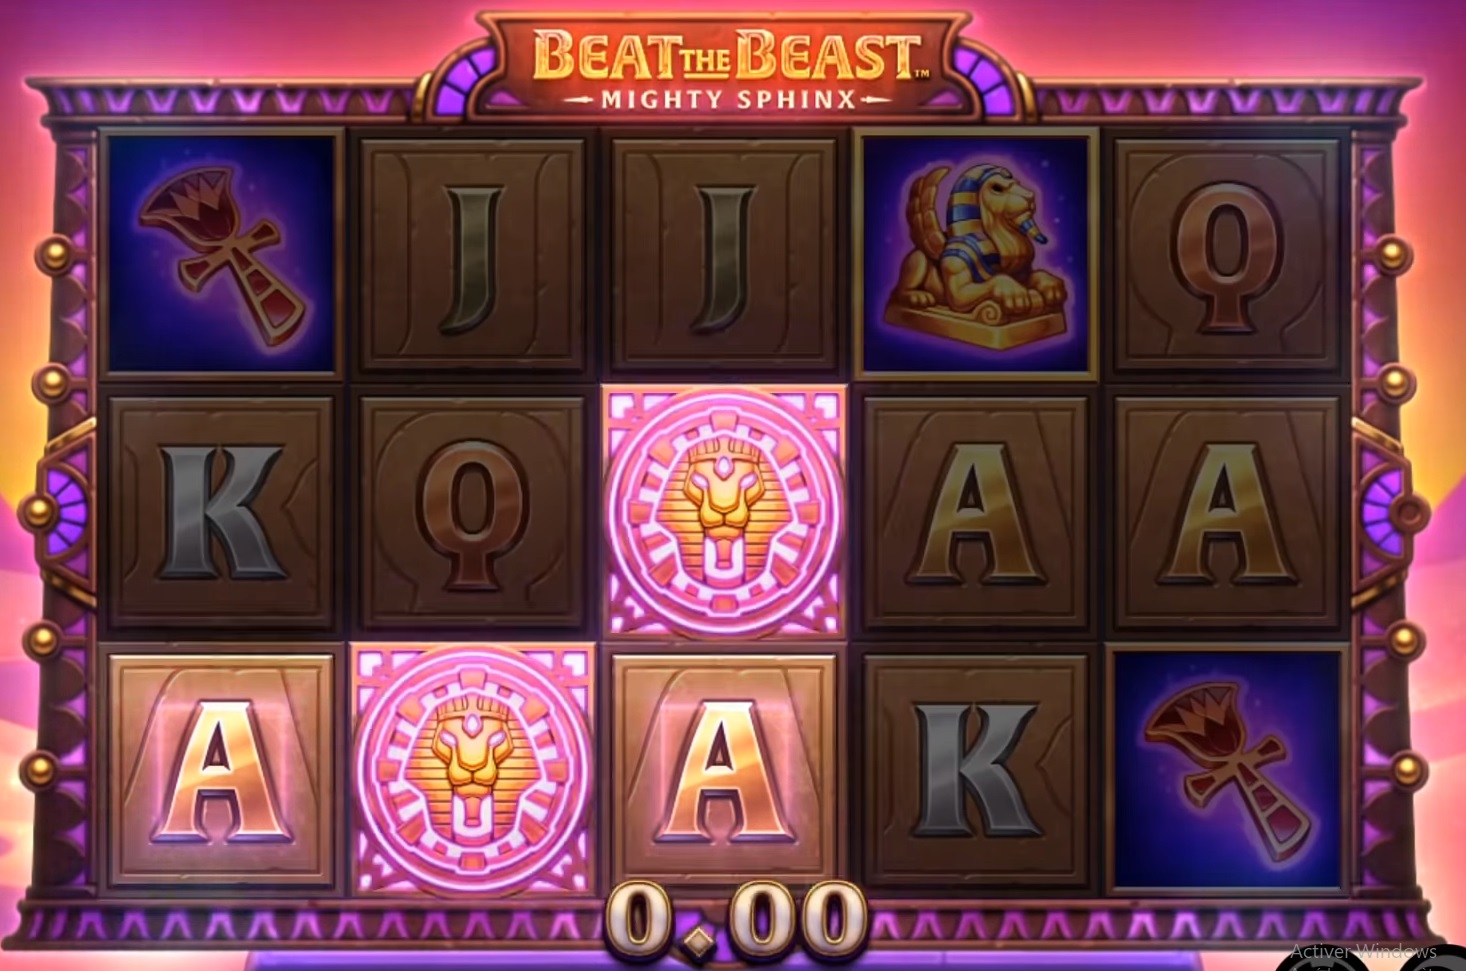 Mighty Sphinx from Beat the Beast: how to aim for the best bet